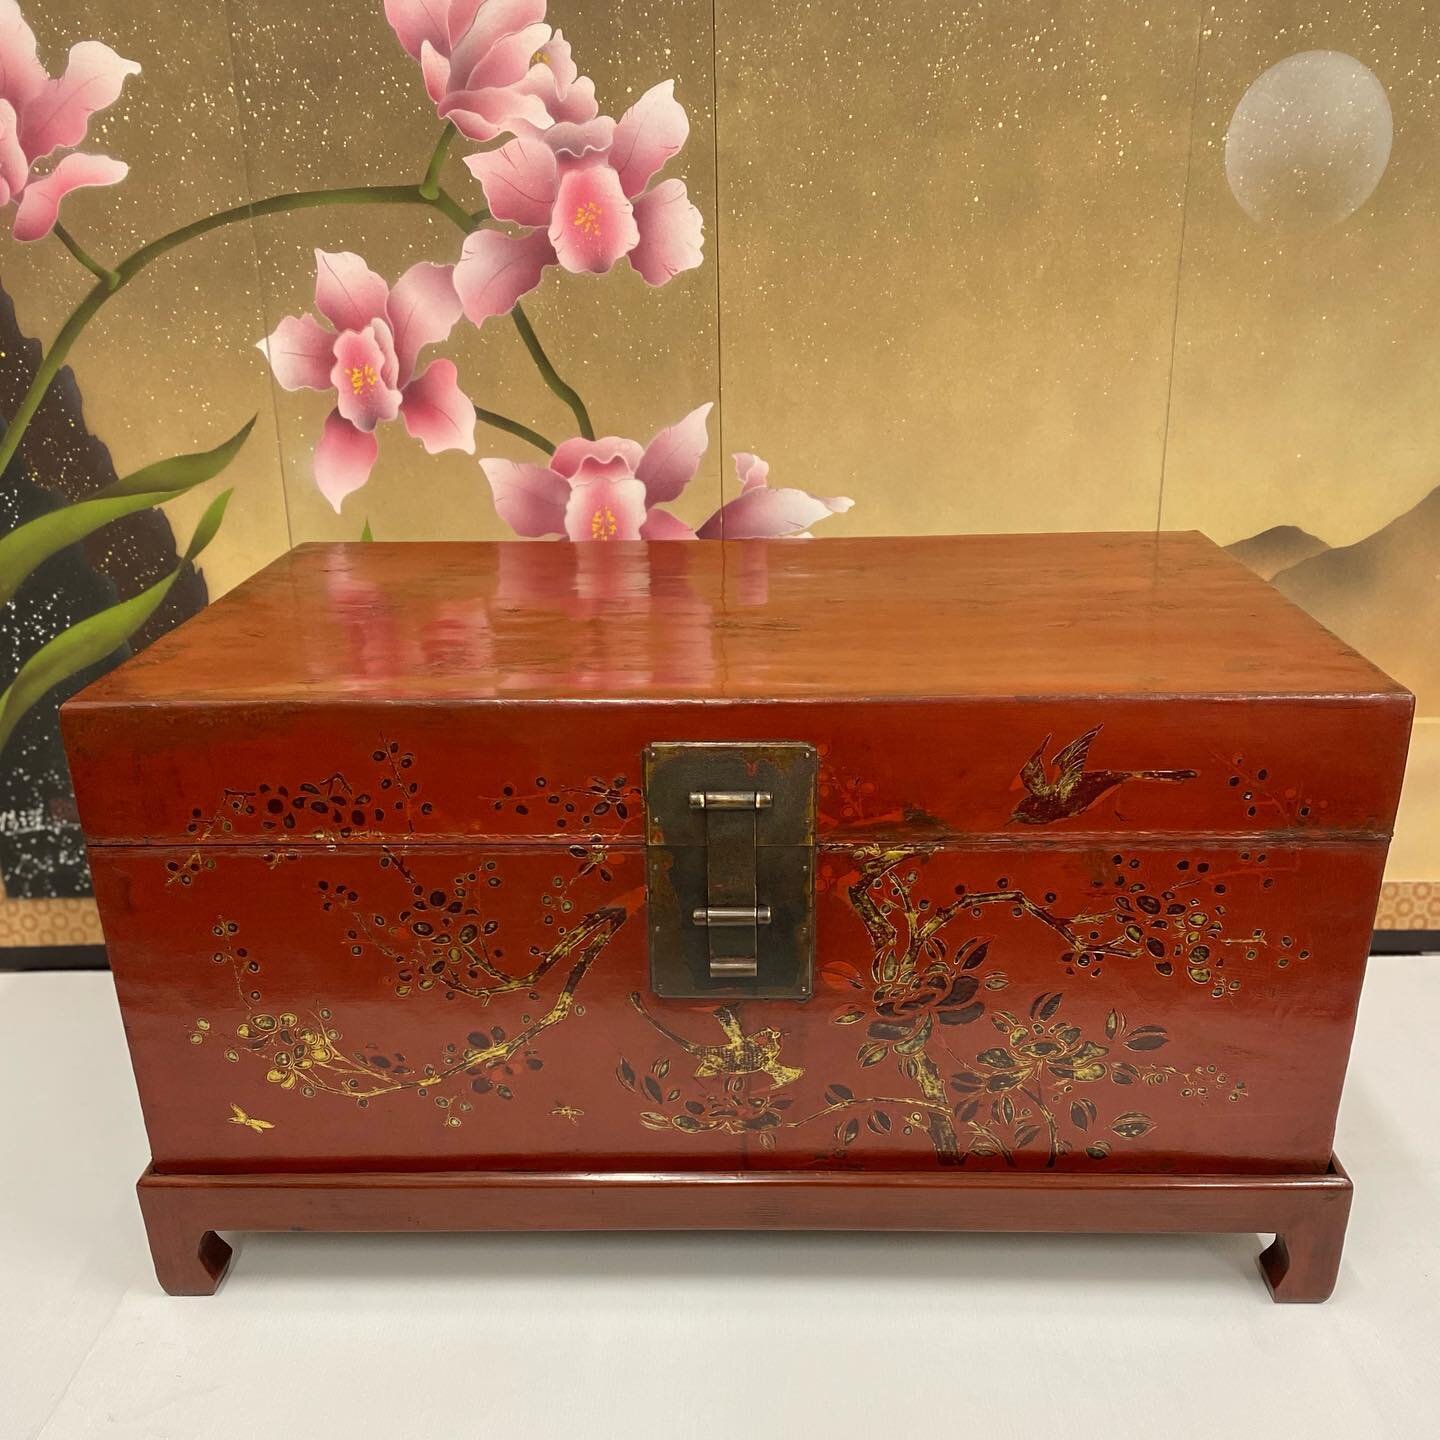 A recently restored 19th century red leather hand painted Chinese trunk on stand. Available at @hjquigleyantiques